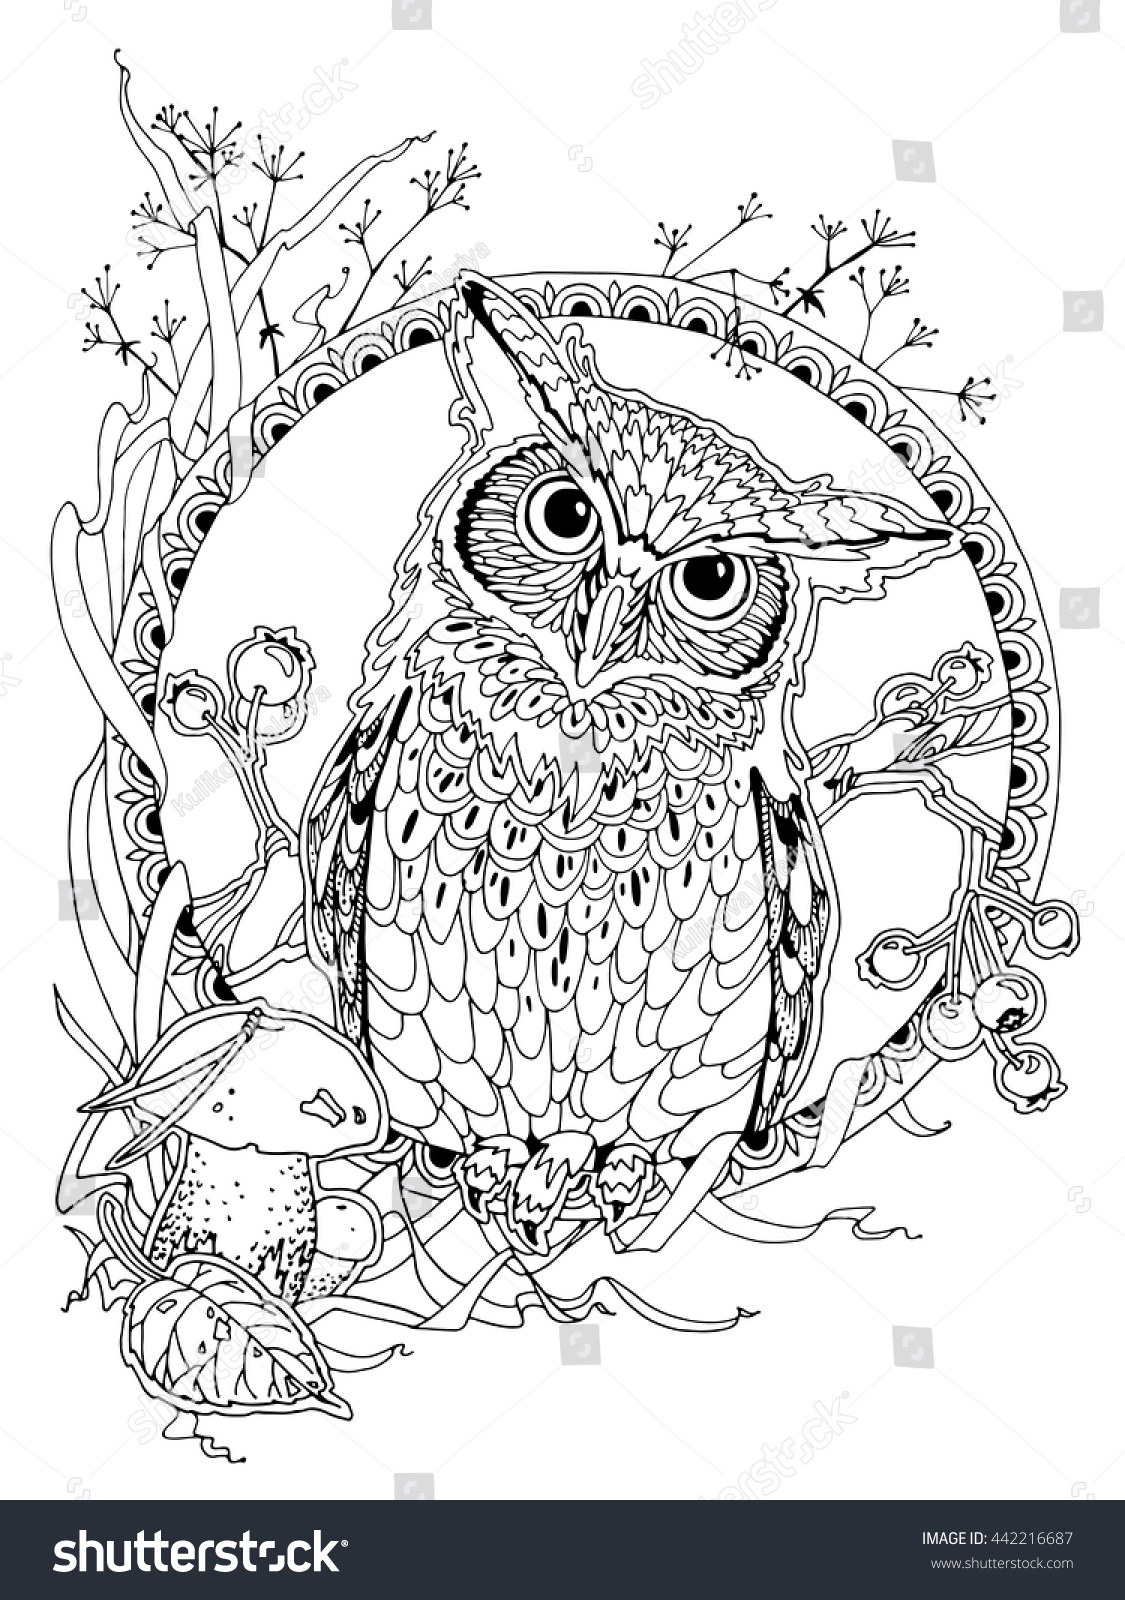 coloring page for adults owl with forest elements